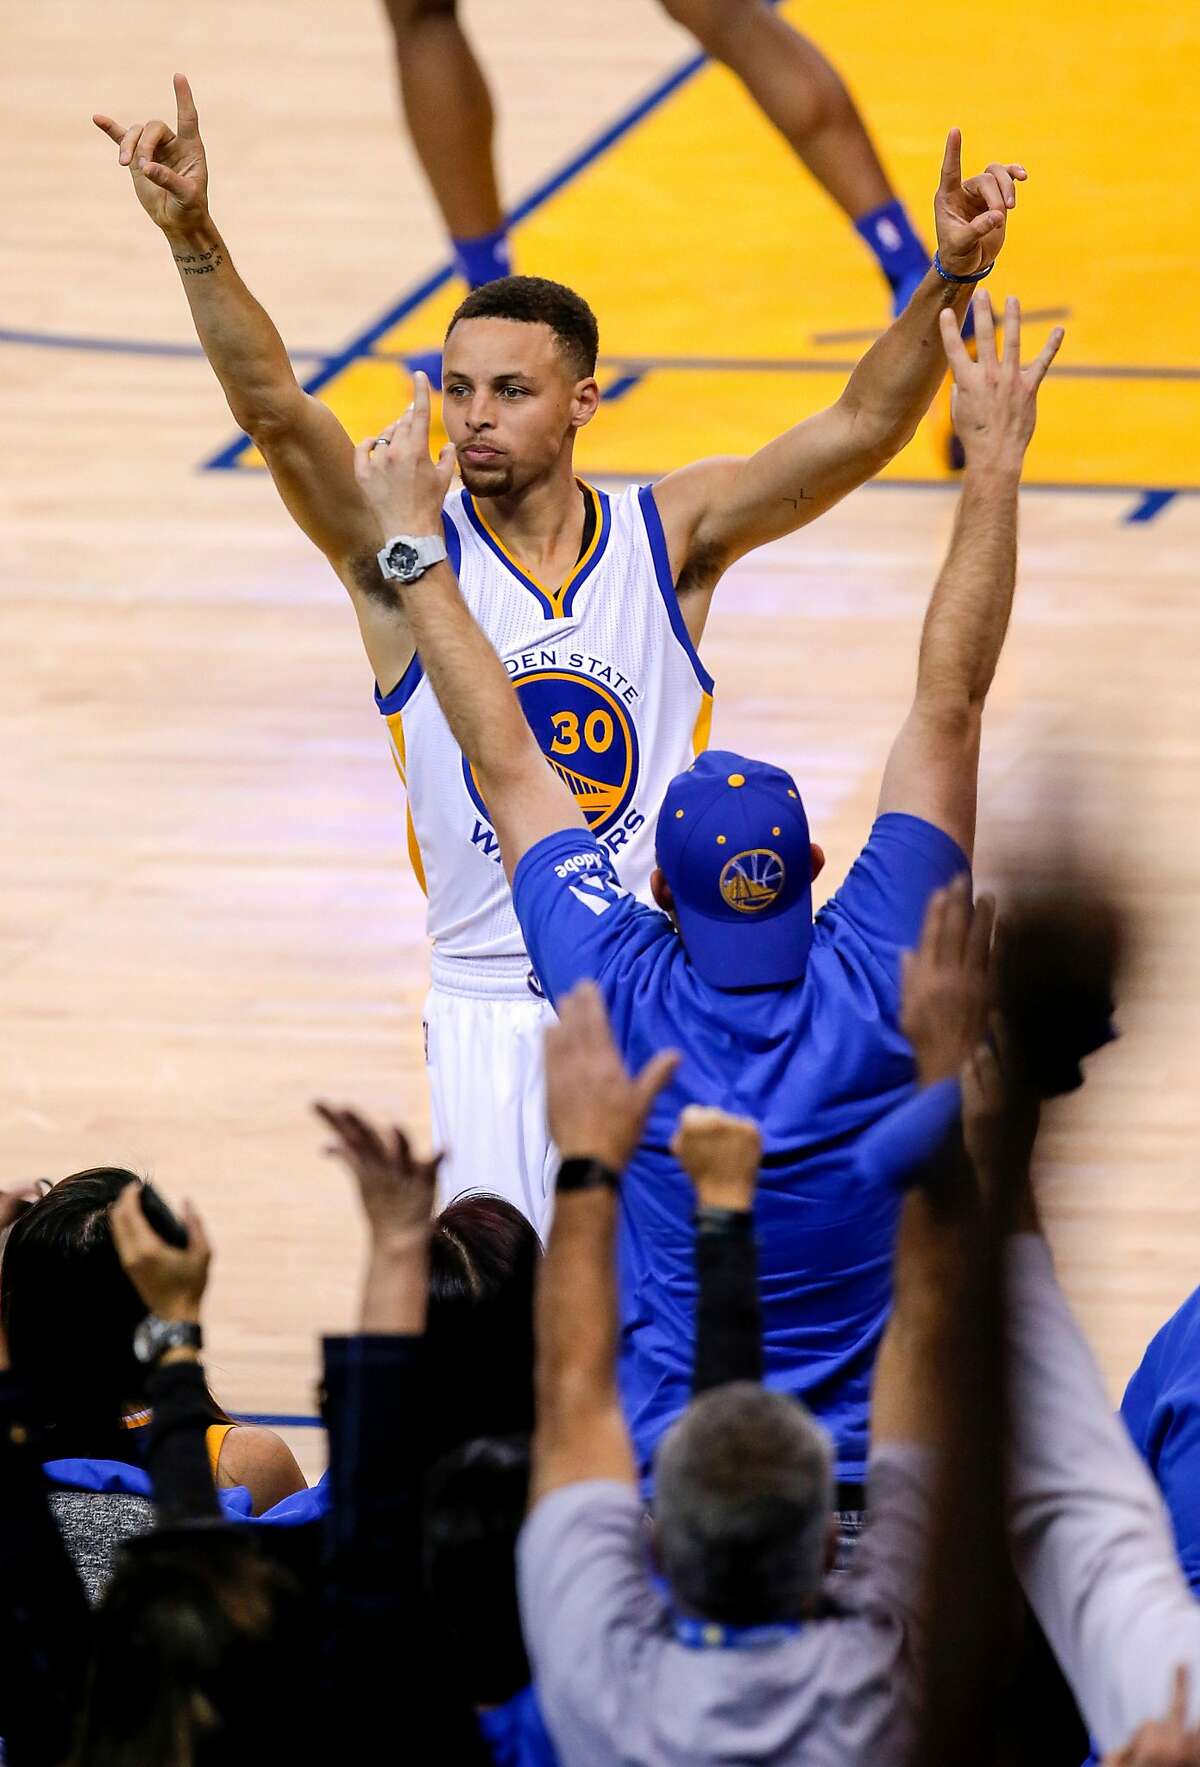 Stephen Curry celebrates his 400th three point shot of the season during the third quarter as the Golden State Warriors take on the Memphis Grizzlies ,at the Oracle Arena in Oakland, California on Wed. April 13, 2016.